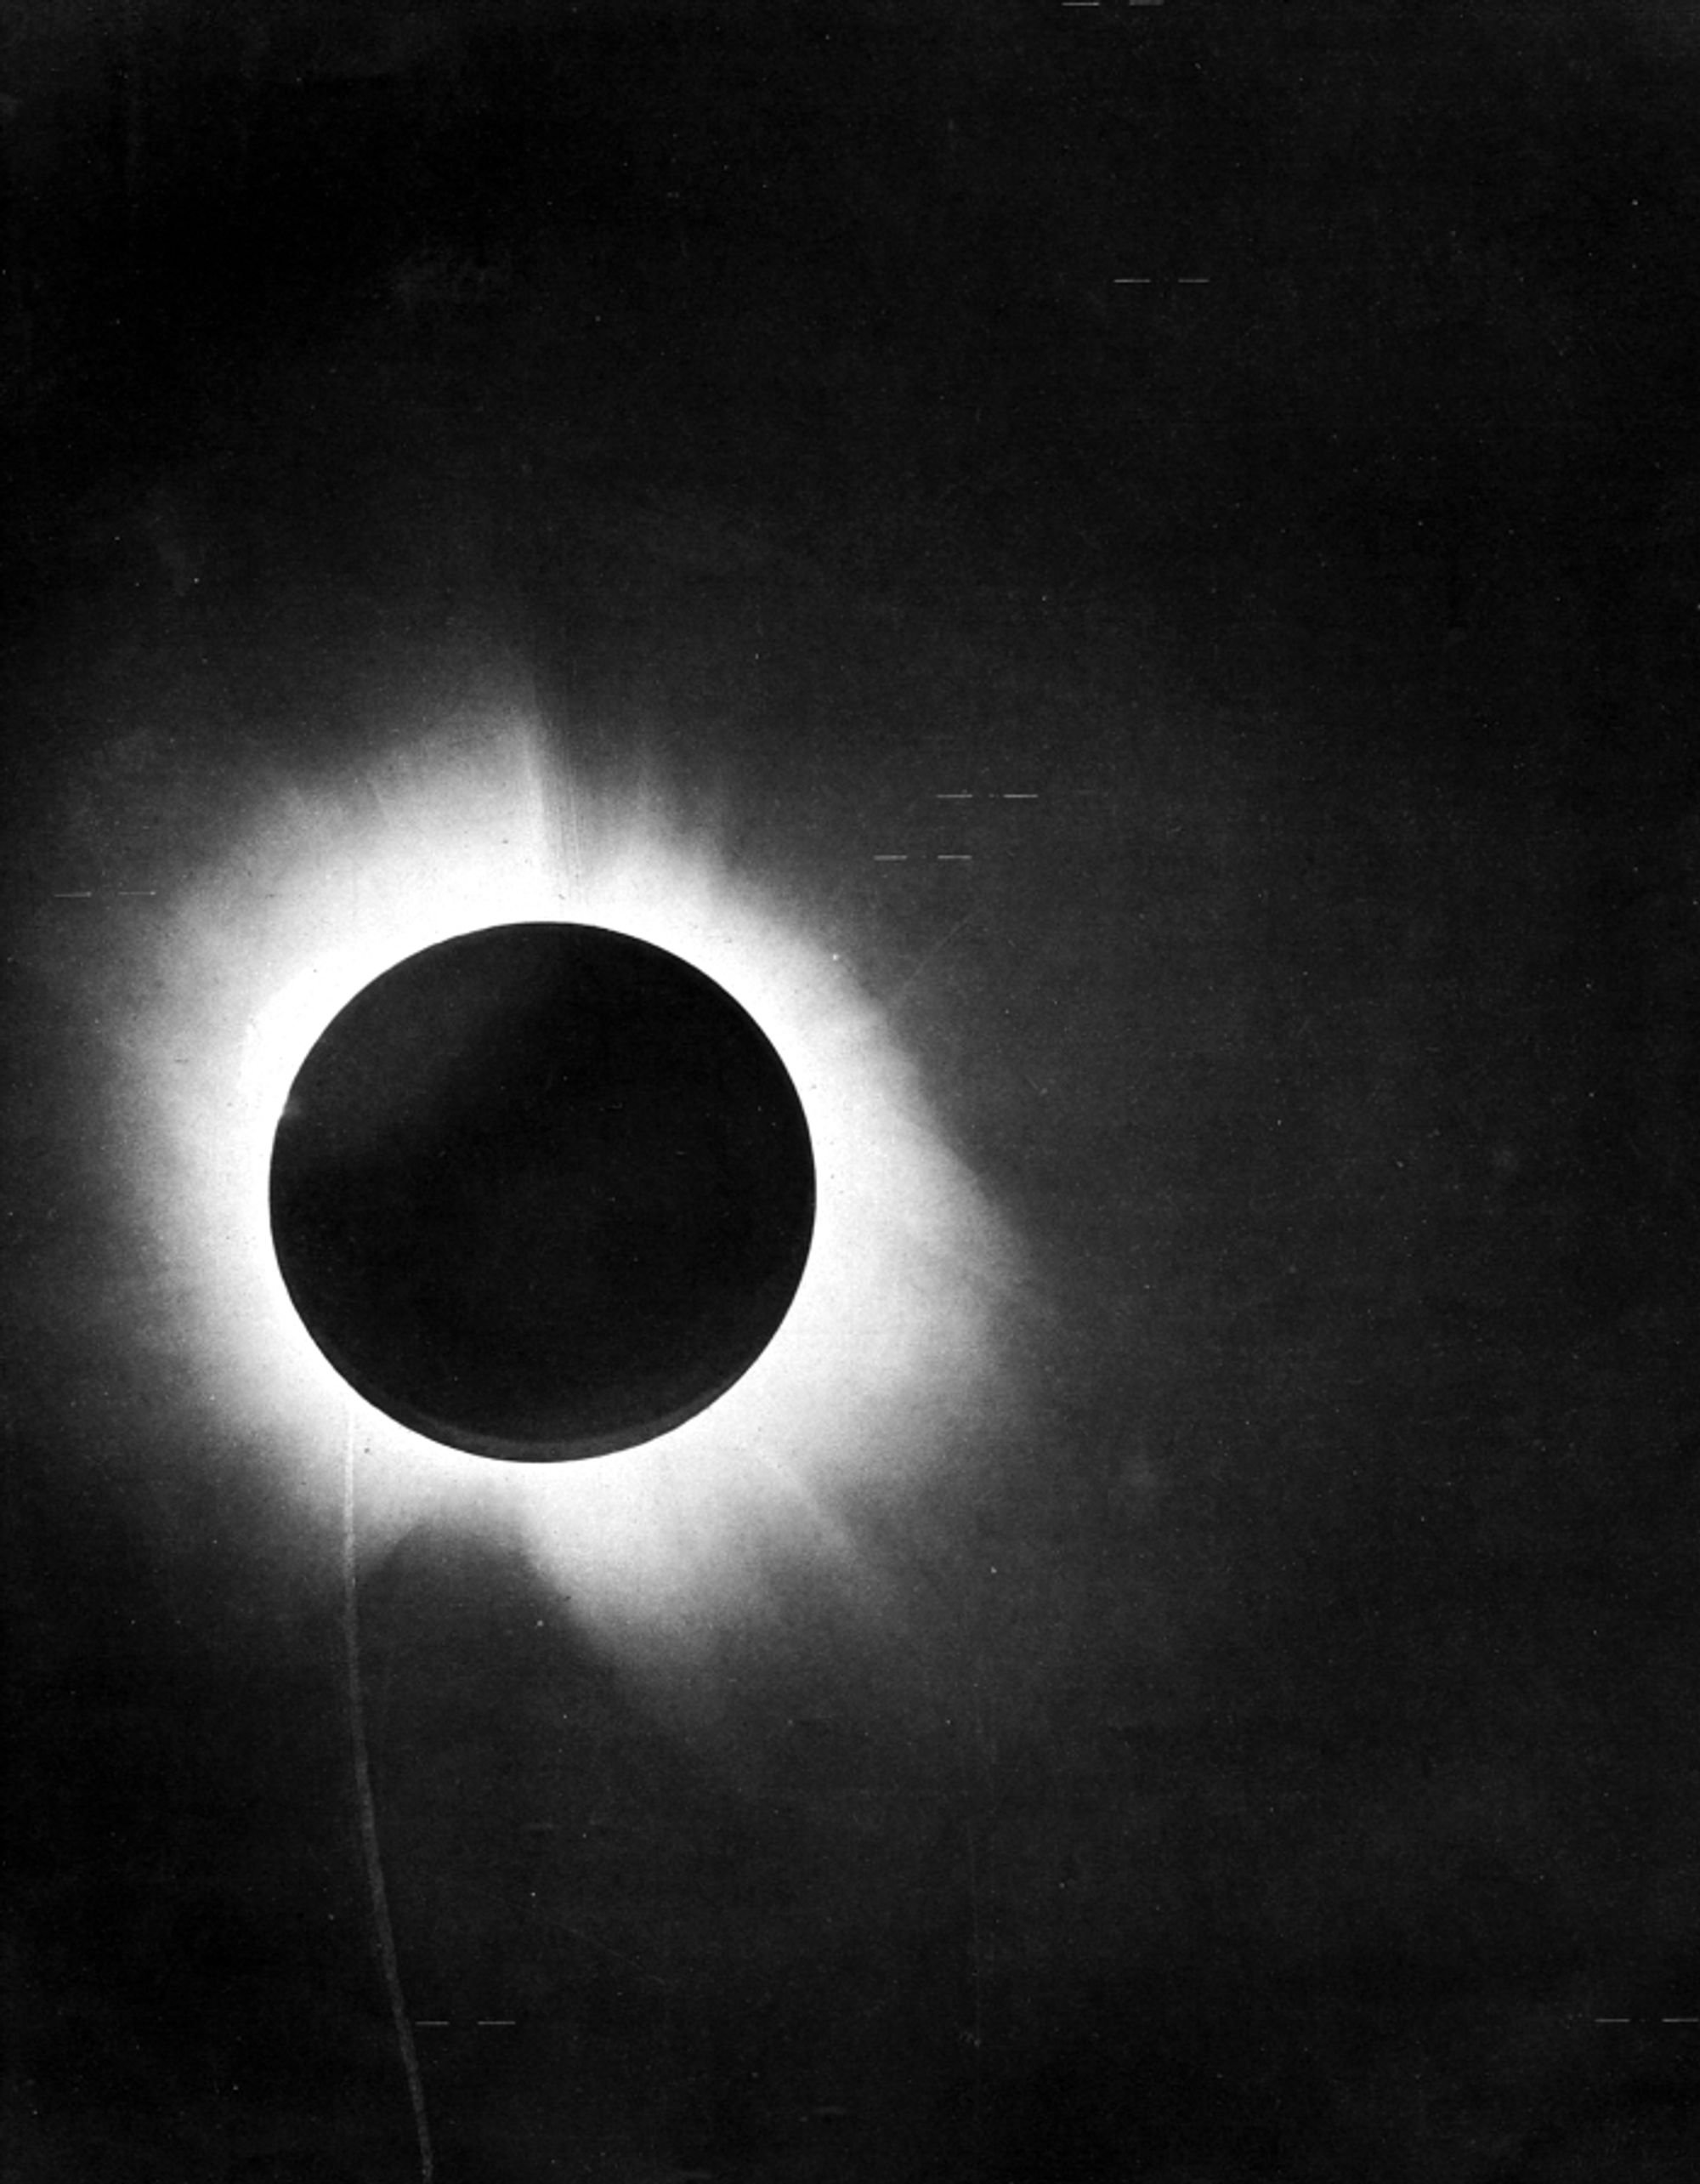 A old black and white image of an eclipsed sun